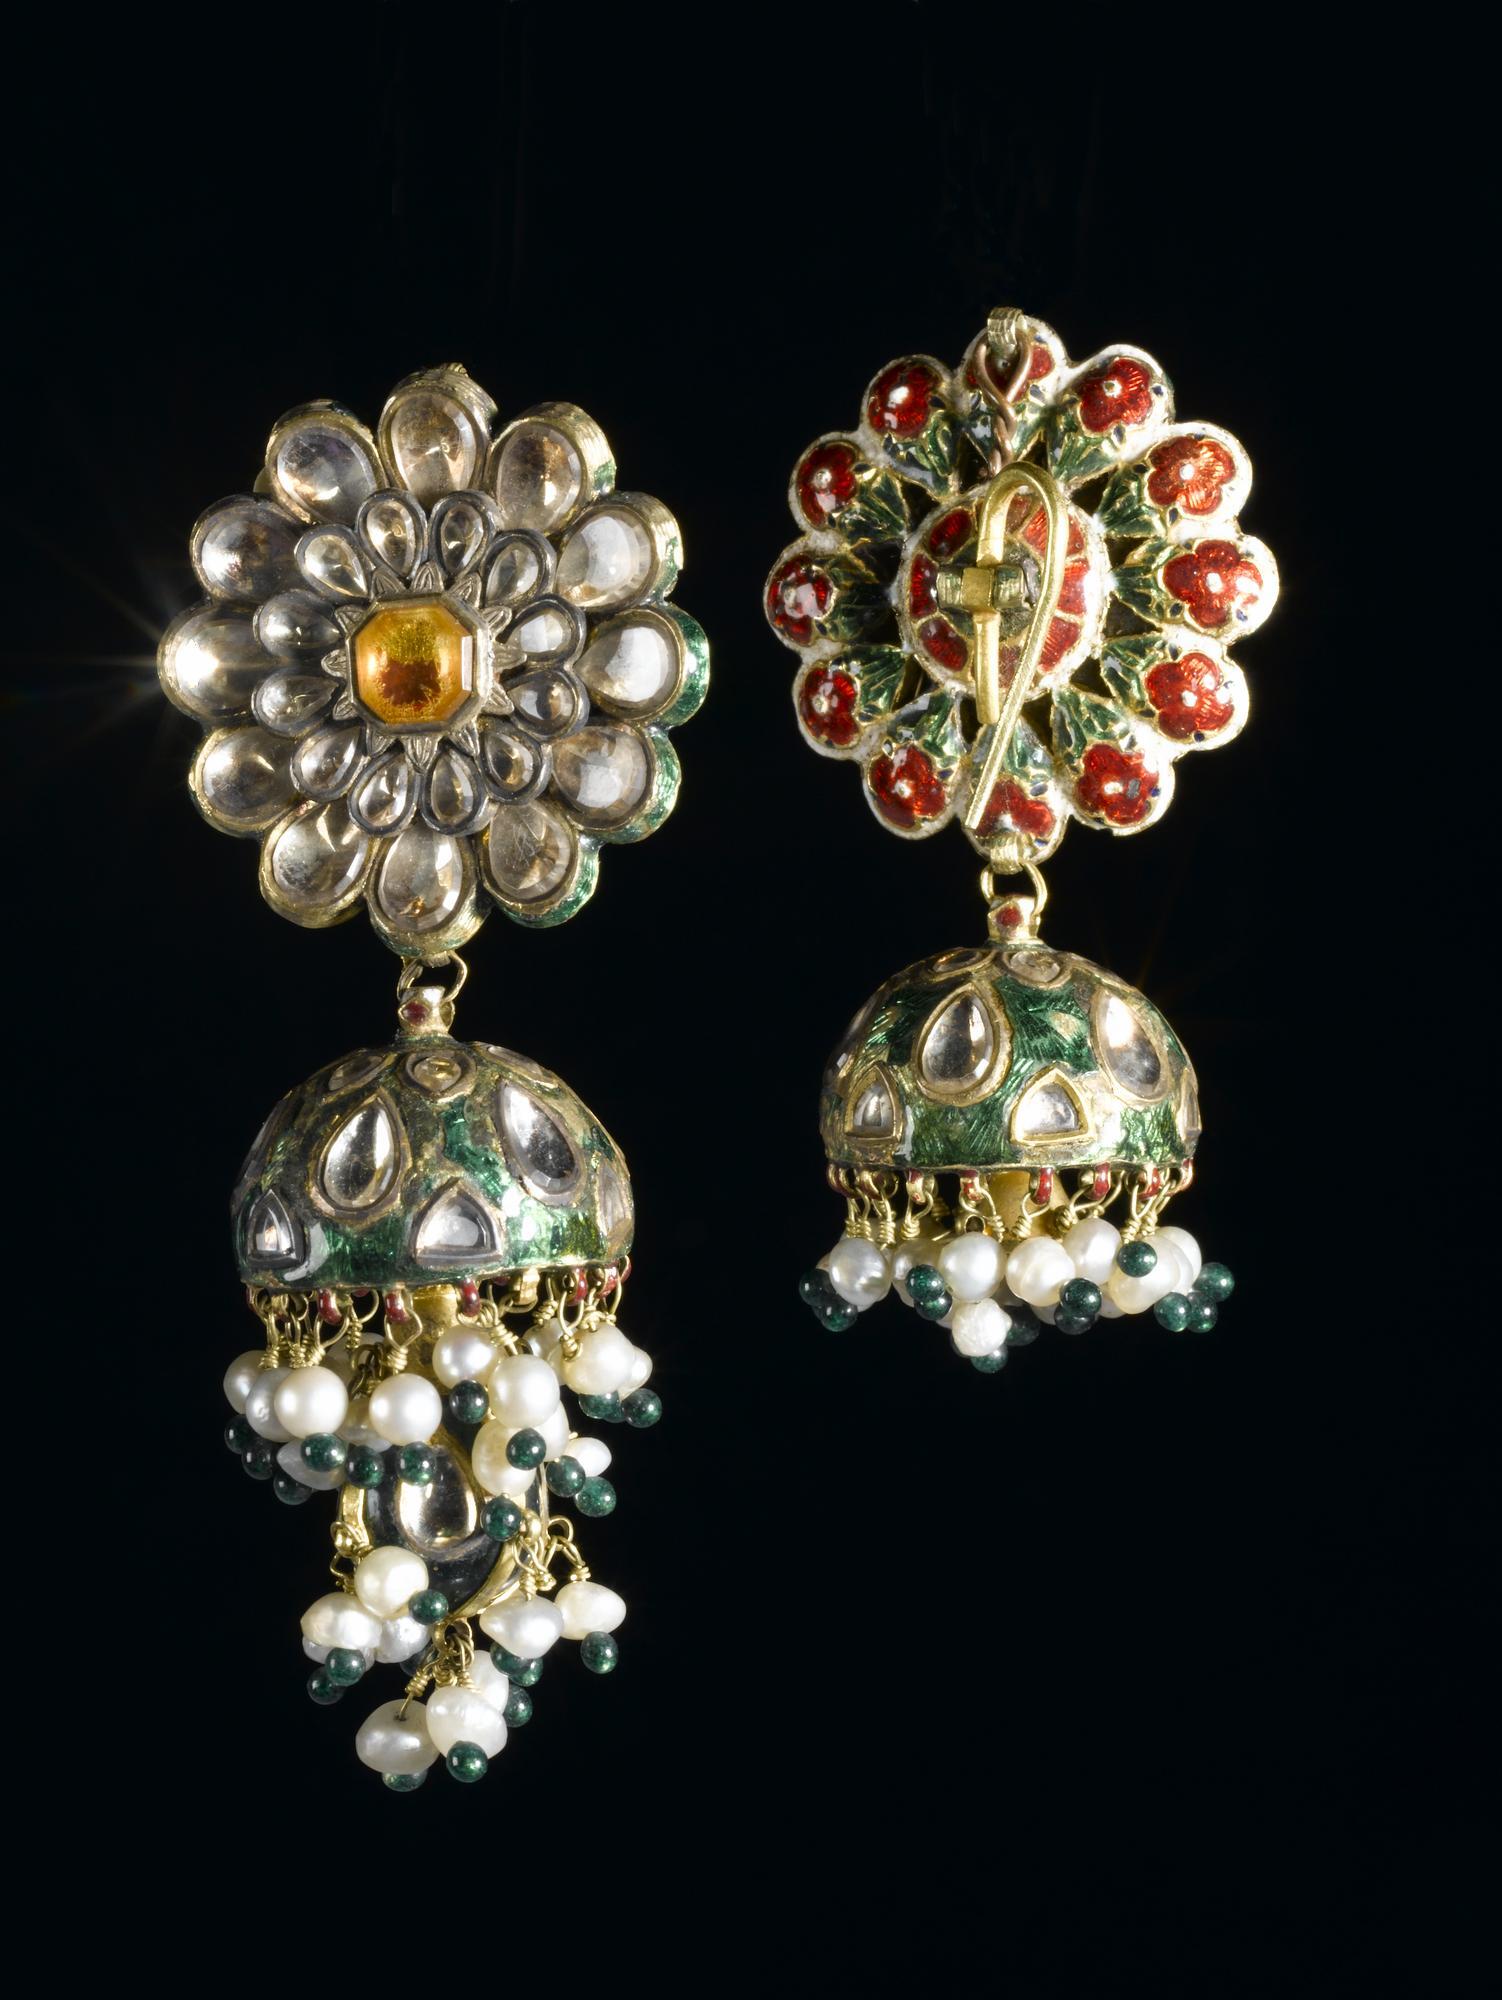 Earrings in the shape of a flower head with inticate detail and beading in drop pendant.